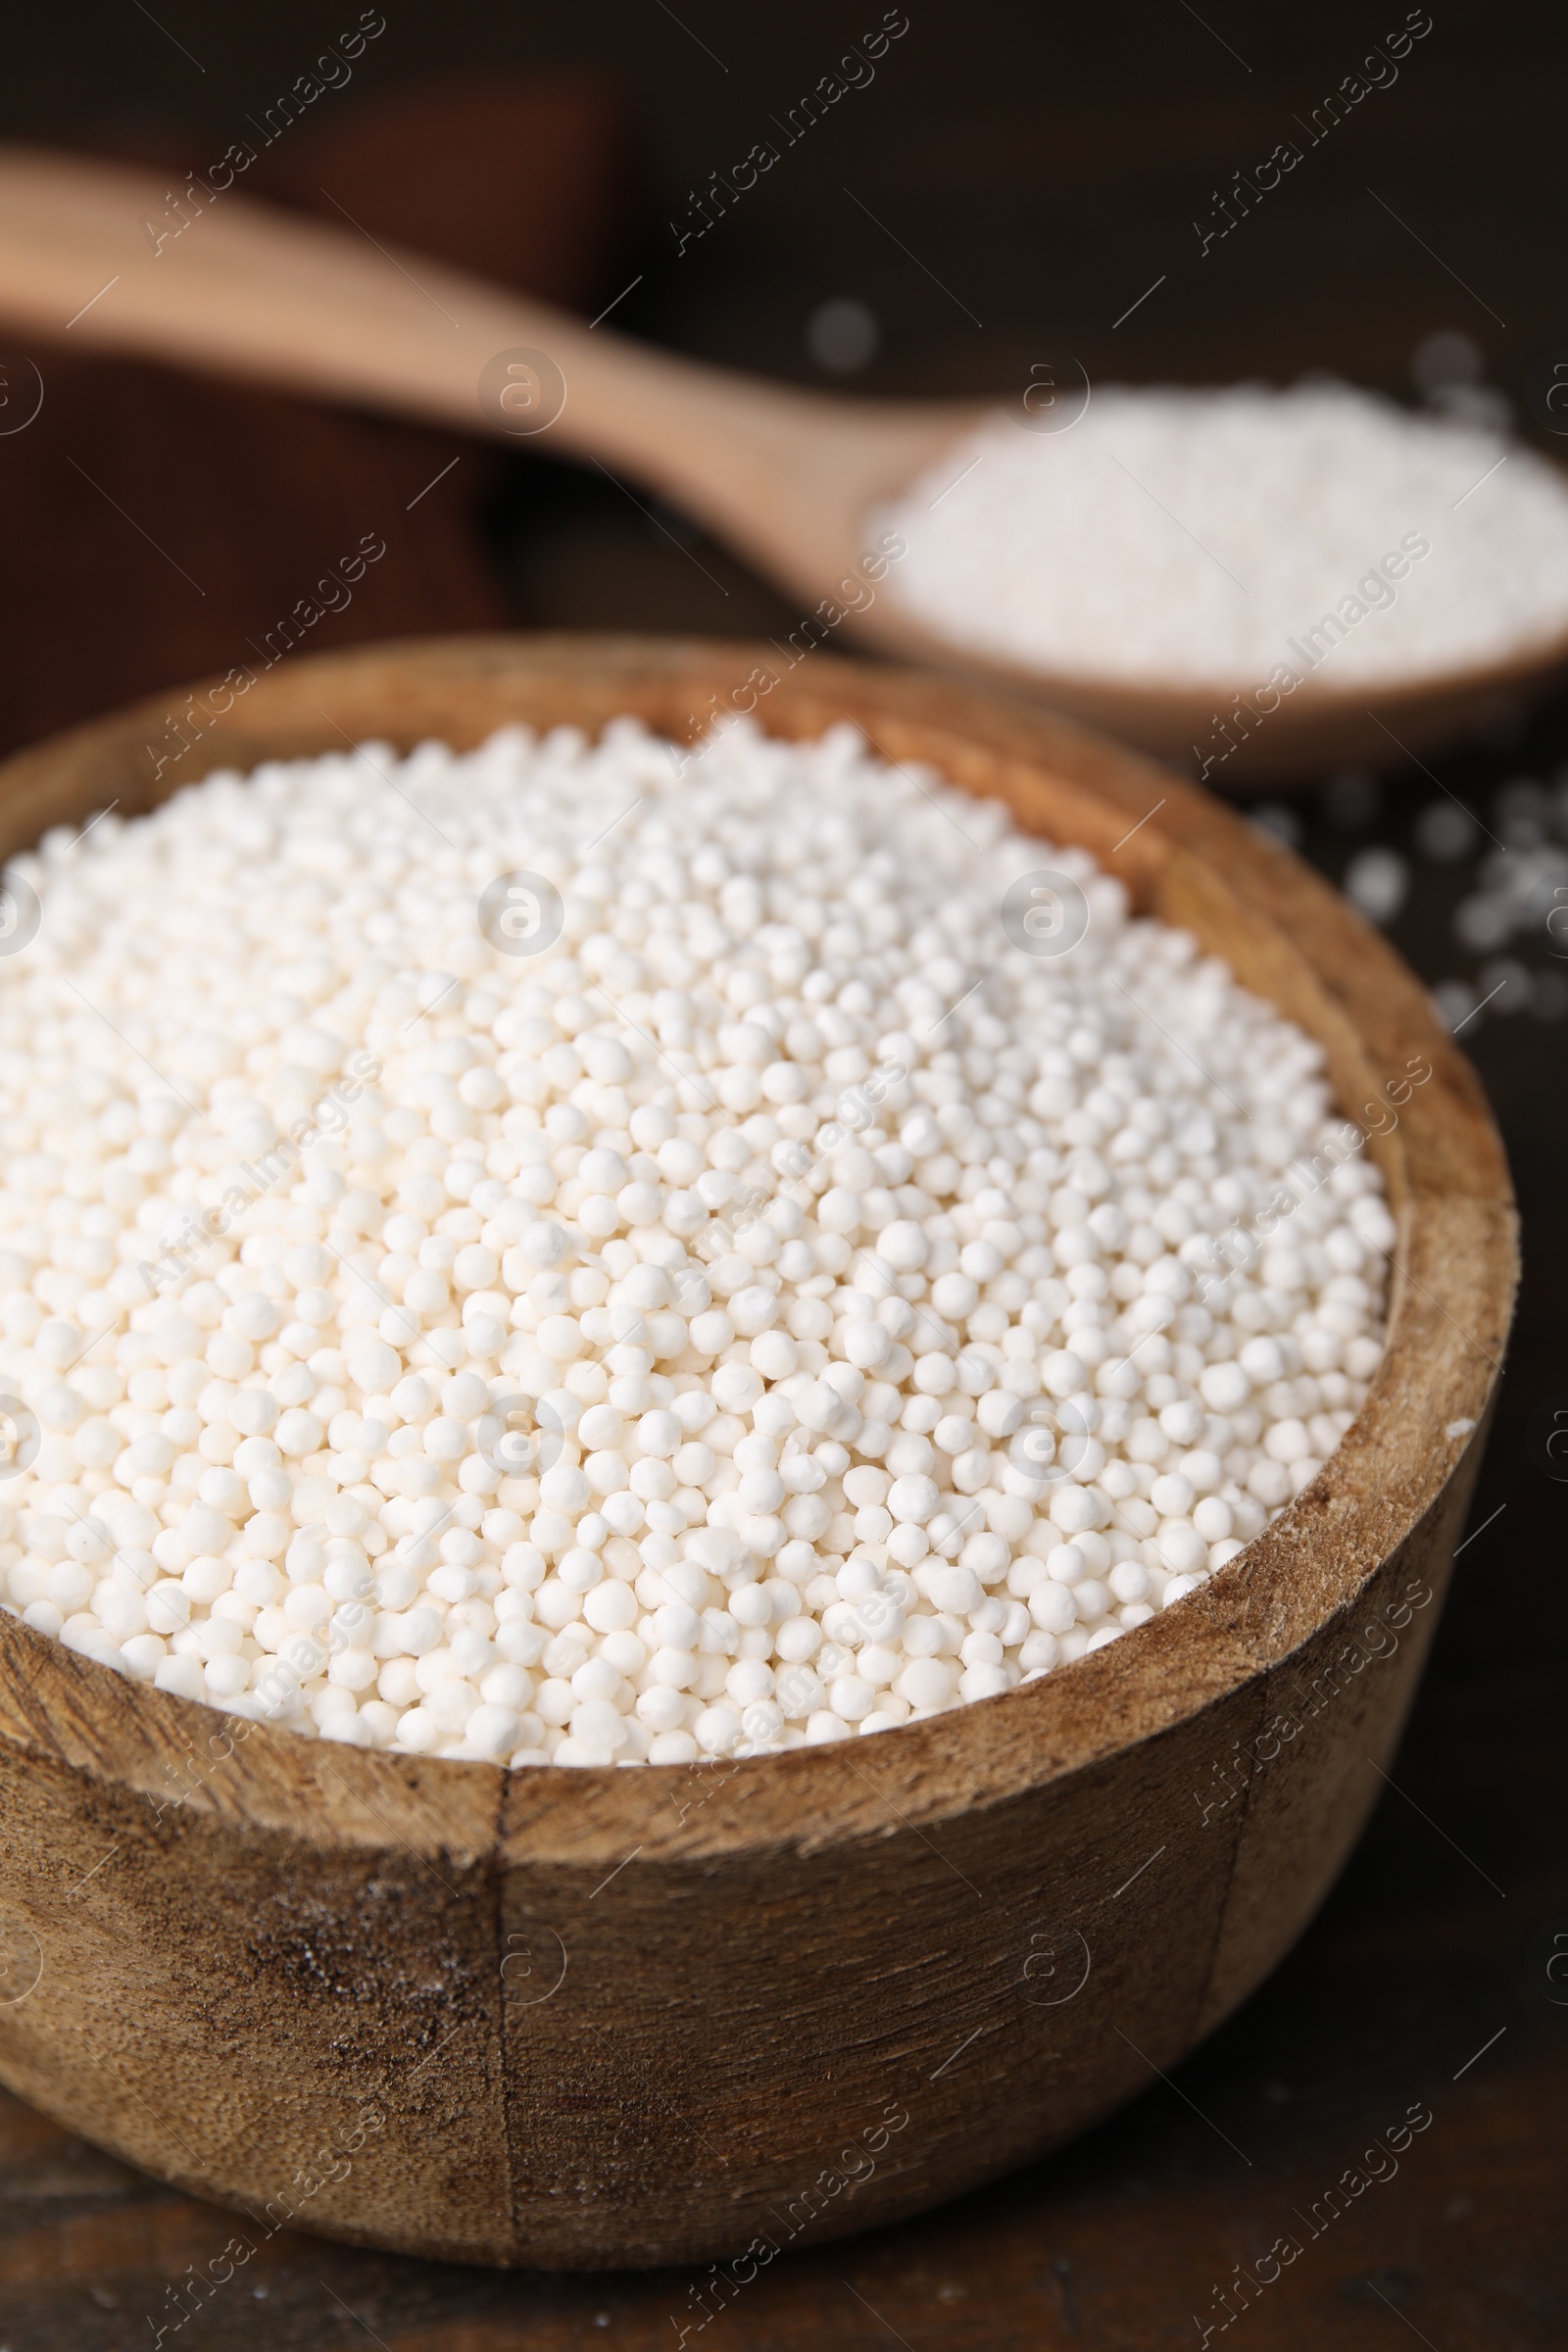 Photo of Tapioca pearls in bowl on wooden table, closeup